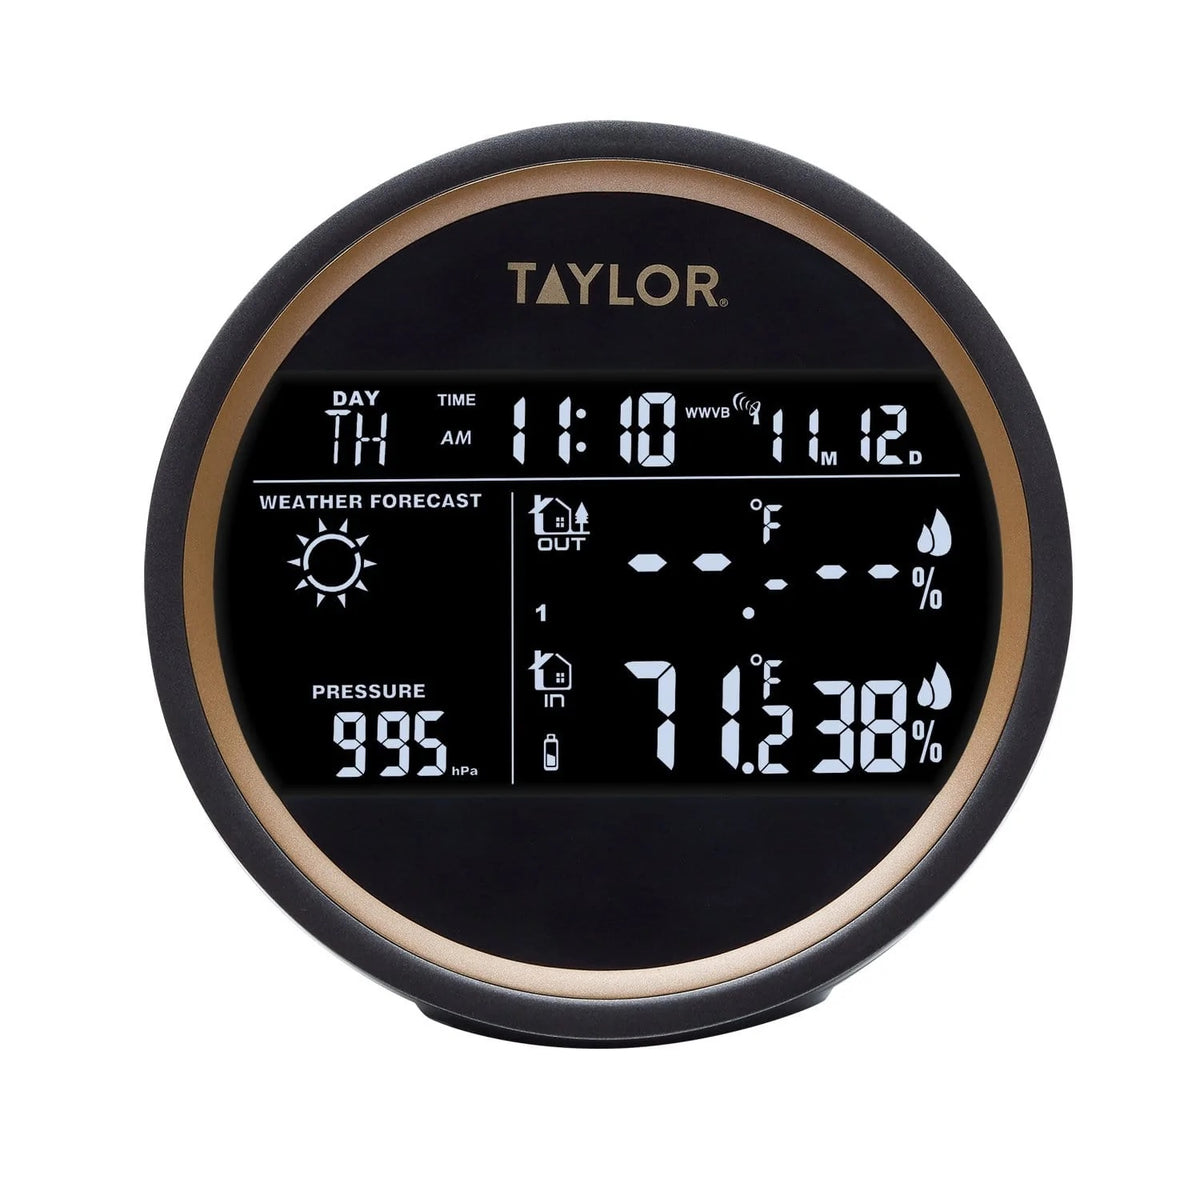 Taylor 5282011 Digital Round Weather Forecaster With LED, Multicolor